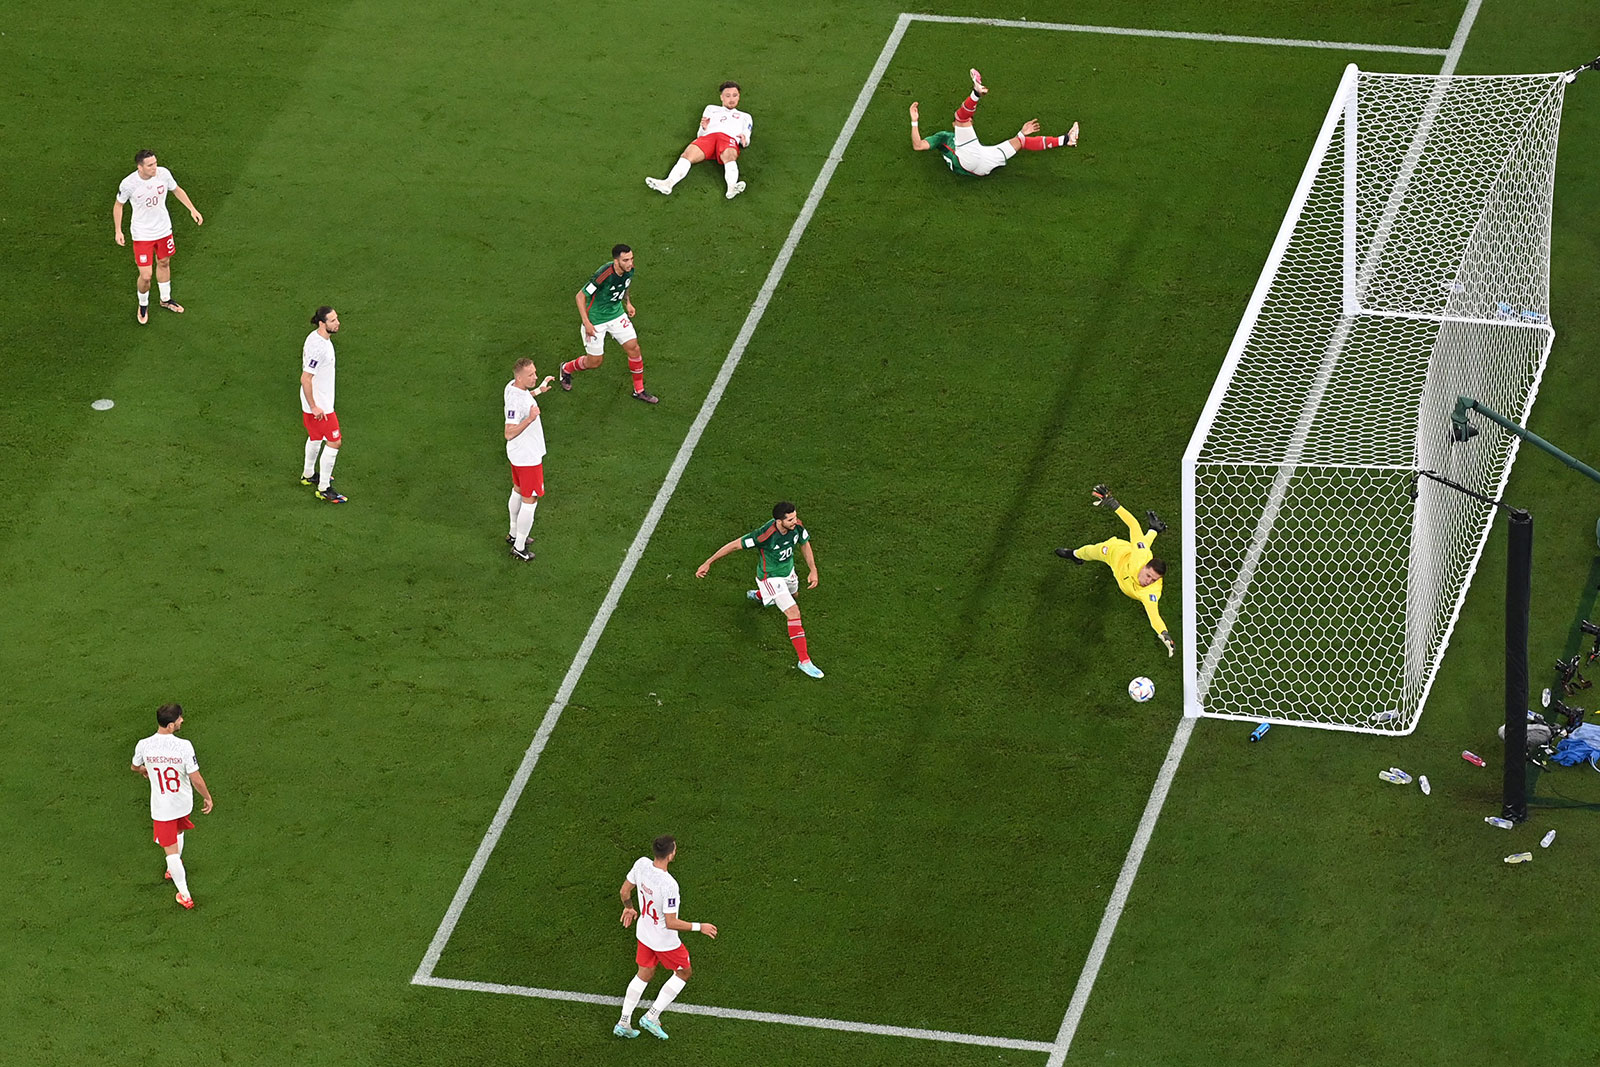 Mexico's forward Alexis Vega, top right, heads the ball towards the goal during the match between Mexico and Poland on November 22.